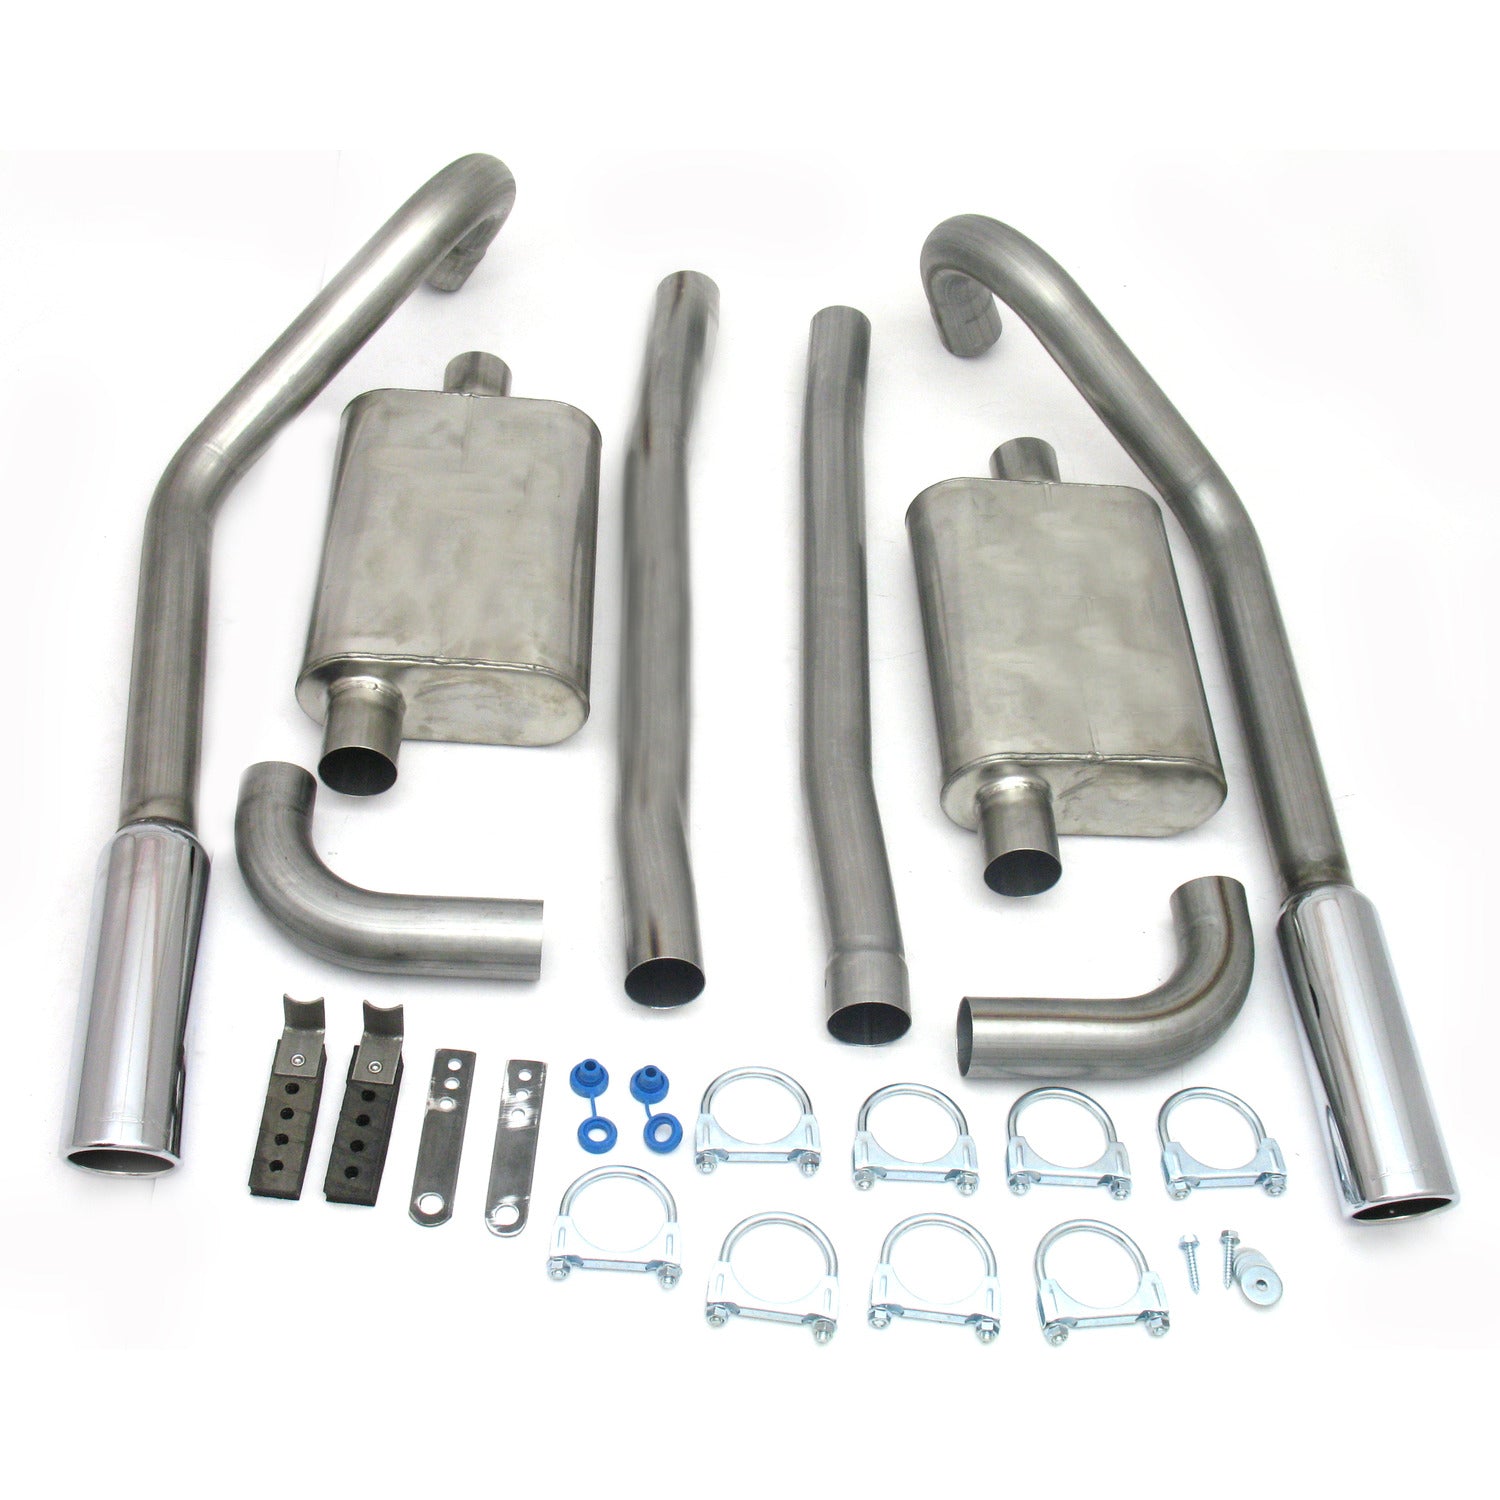 JBA Performance Exhaust 40-2654 2.5" Stainless Steel Exhaust System 67-70 Mustang Exhaust with Tips